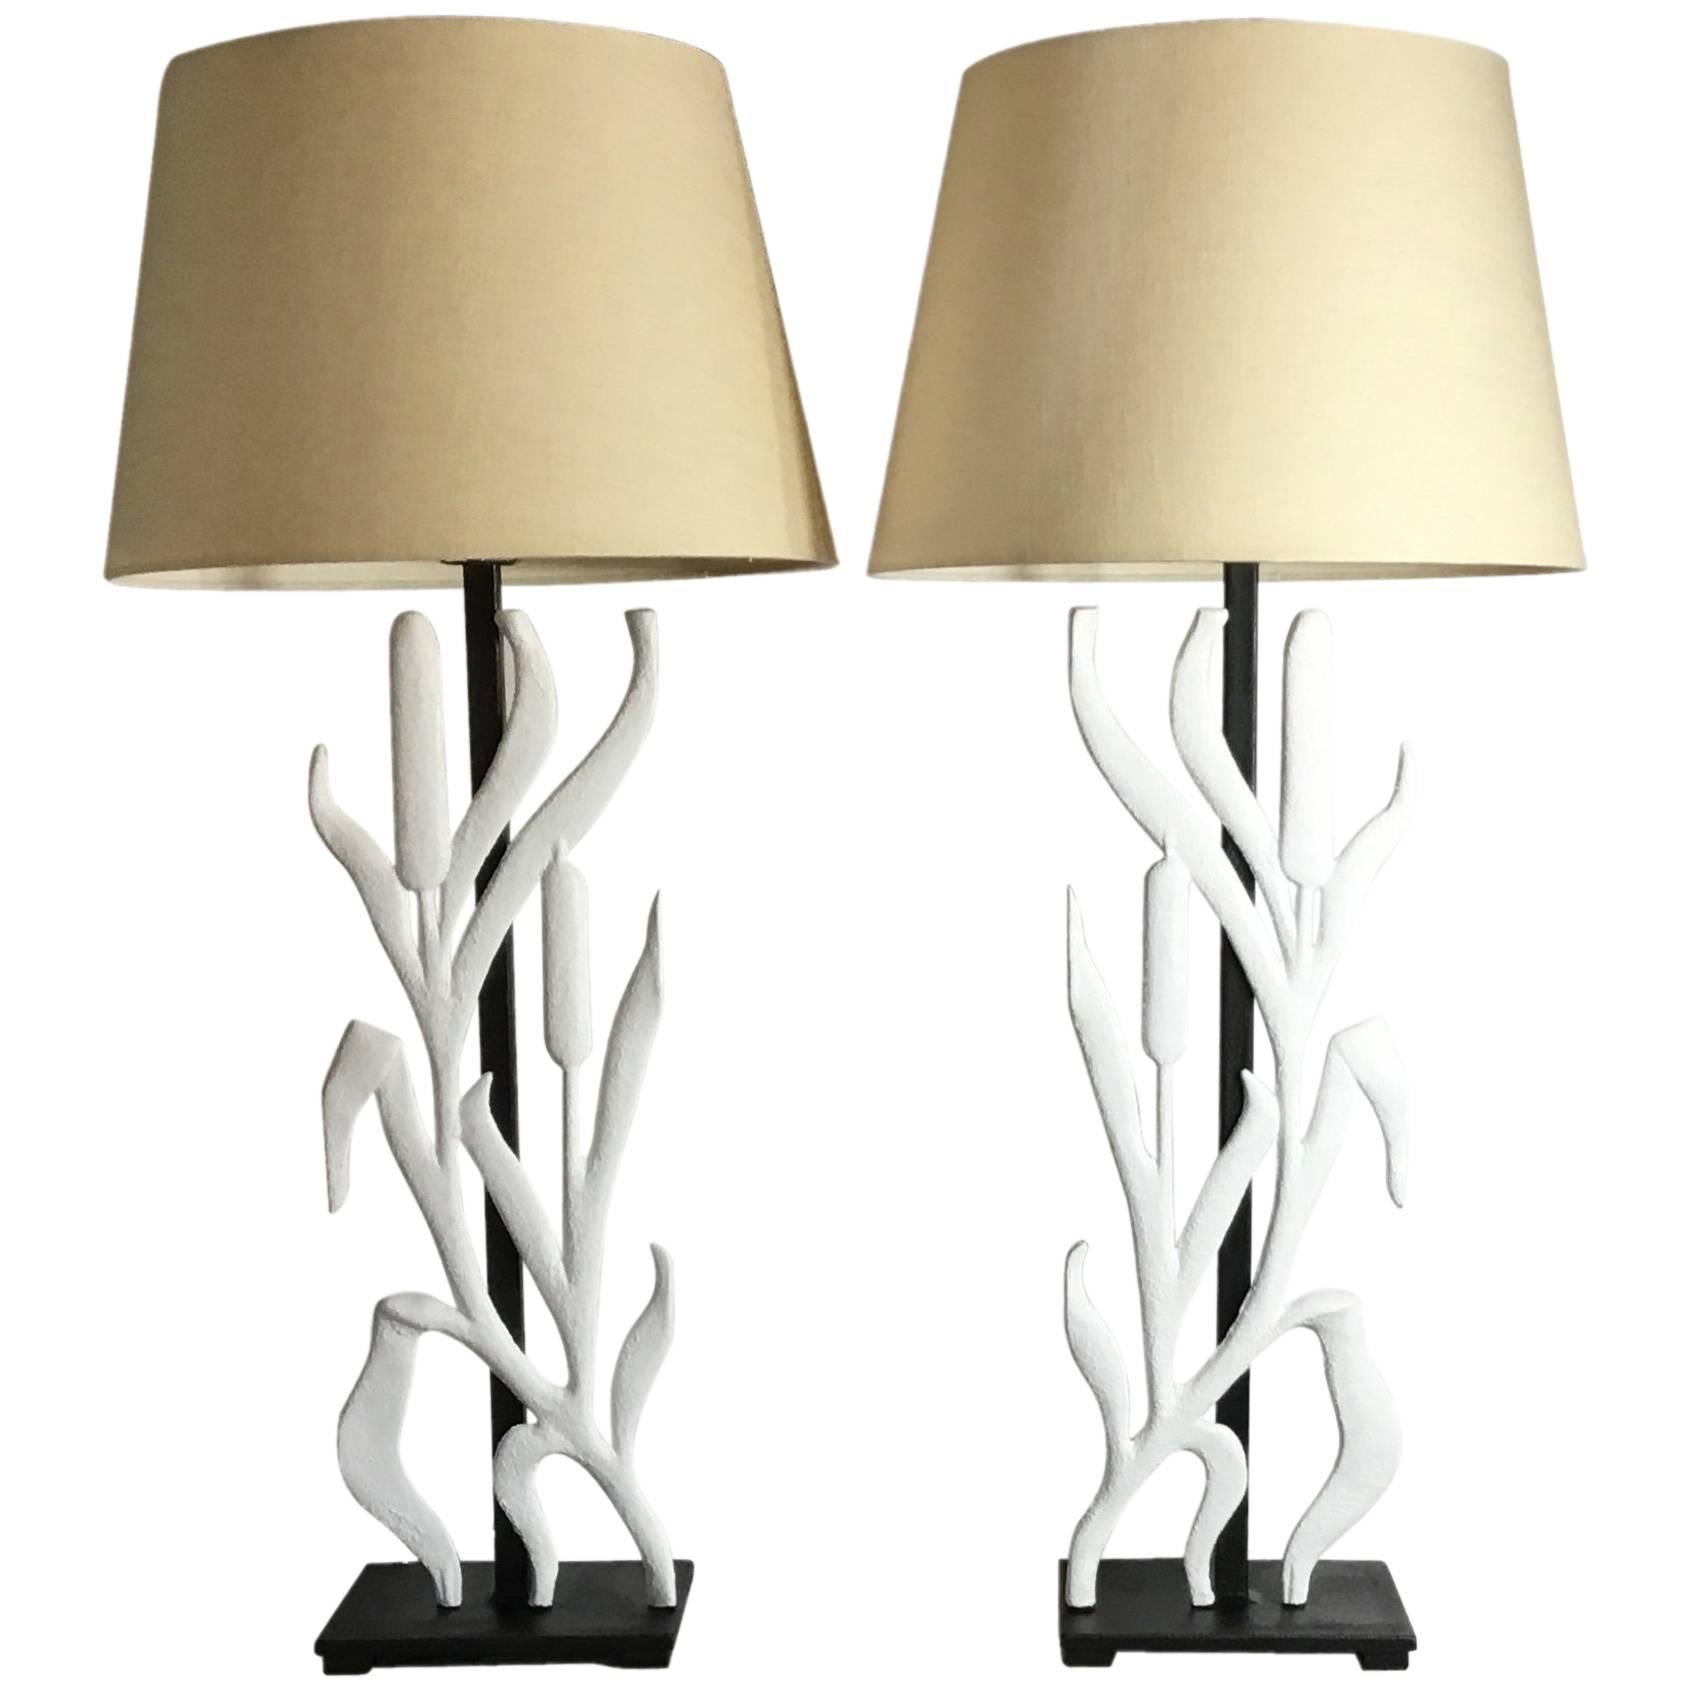 Pair of Cat Tail Iron Table Lamp